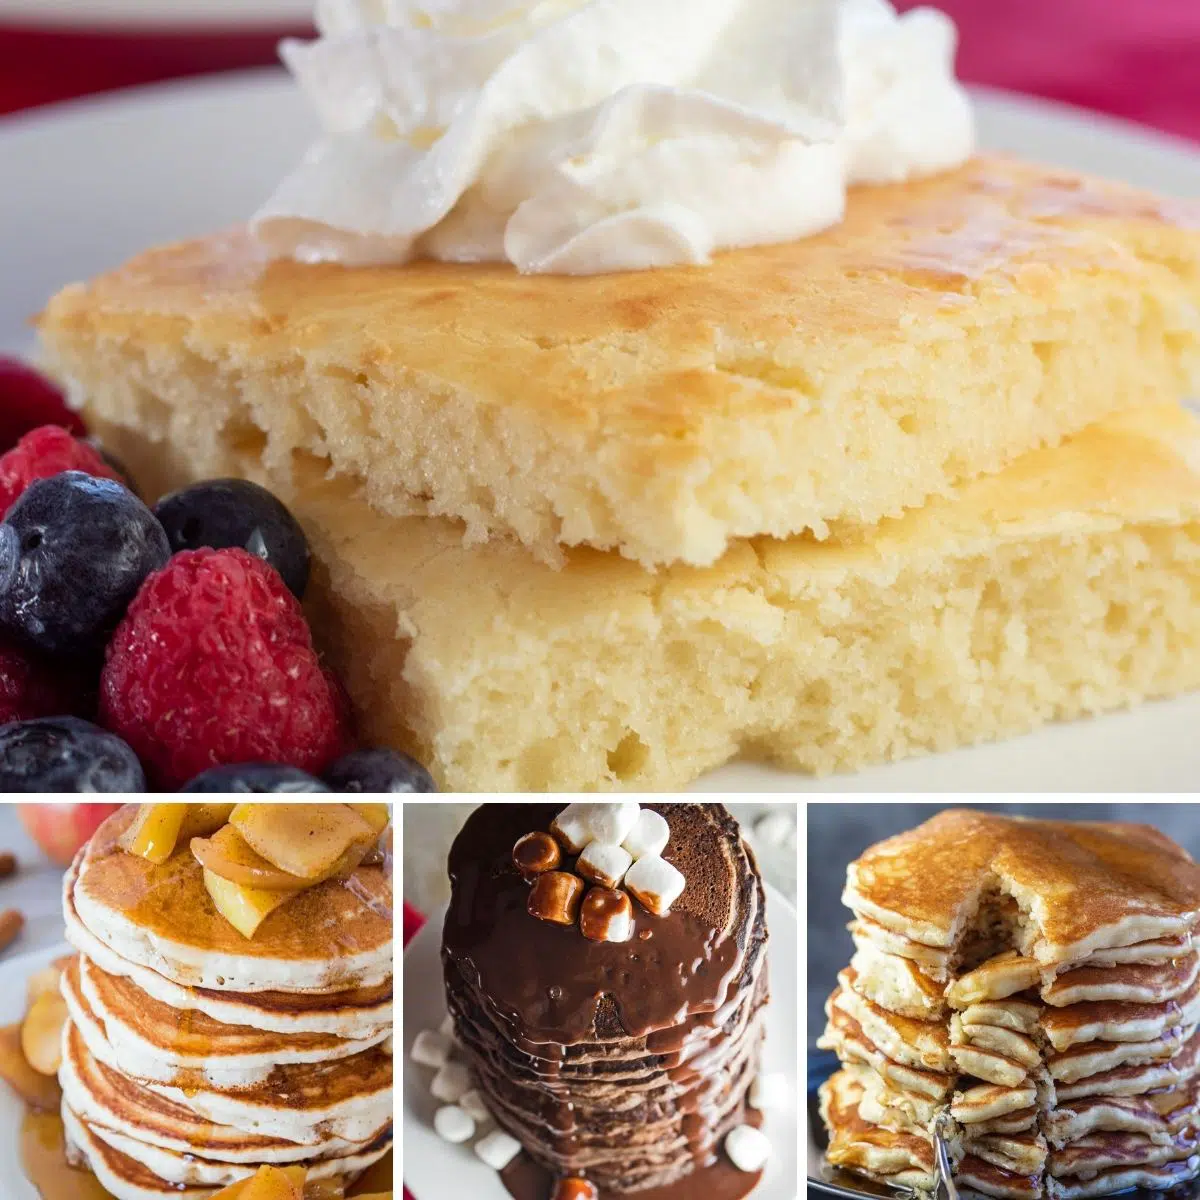 Best pancake recipes collage image of 4 recipes that we share for an amazing weekend breakfast.